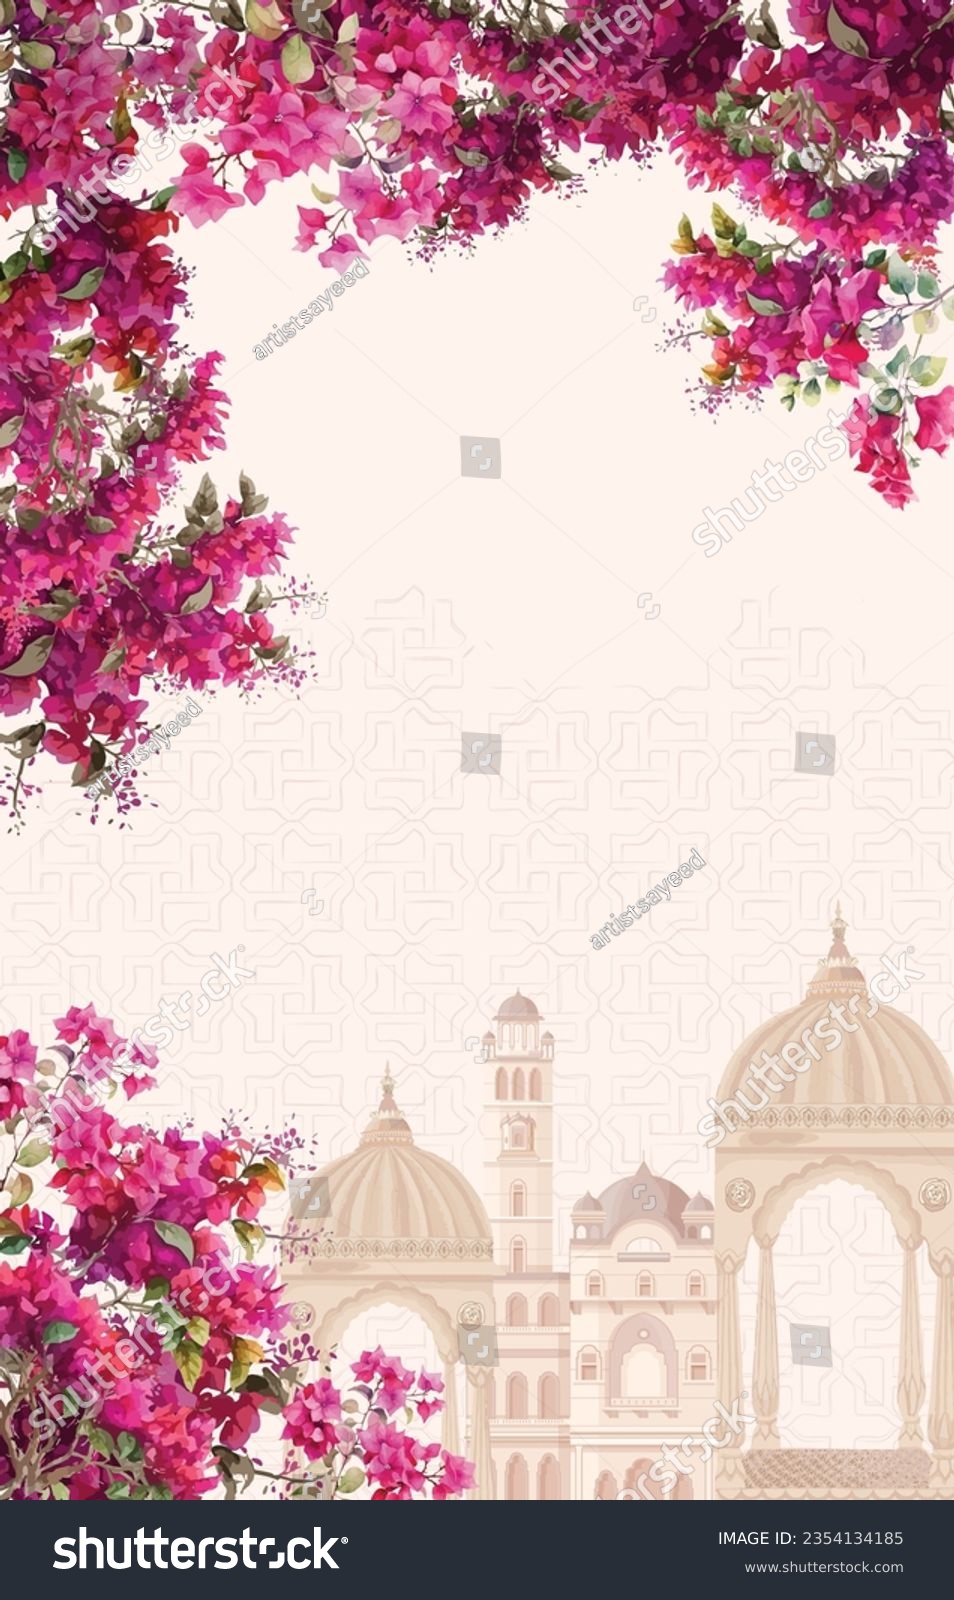 SVG of Mughal ethnic pattern with watercolor bougainvillea flowers illustration for invitation svg